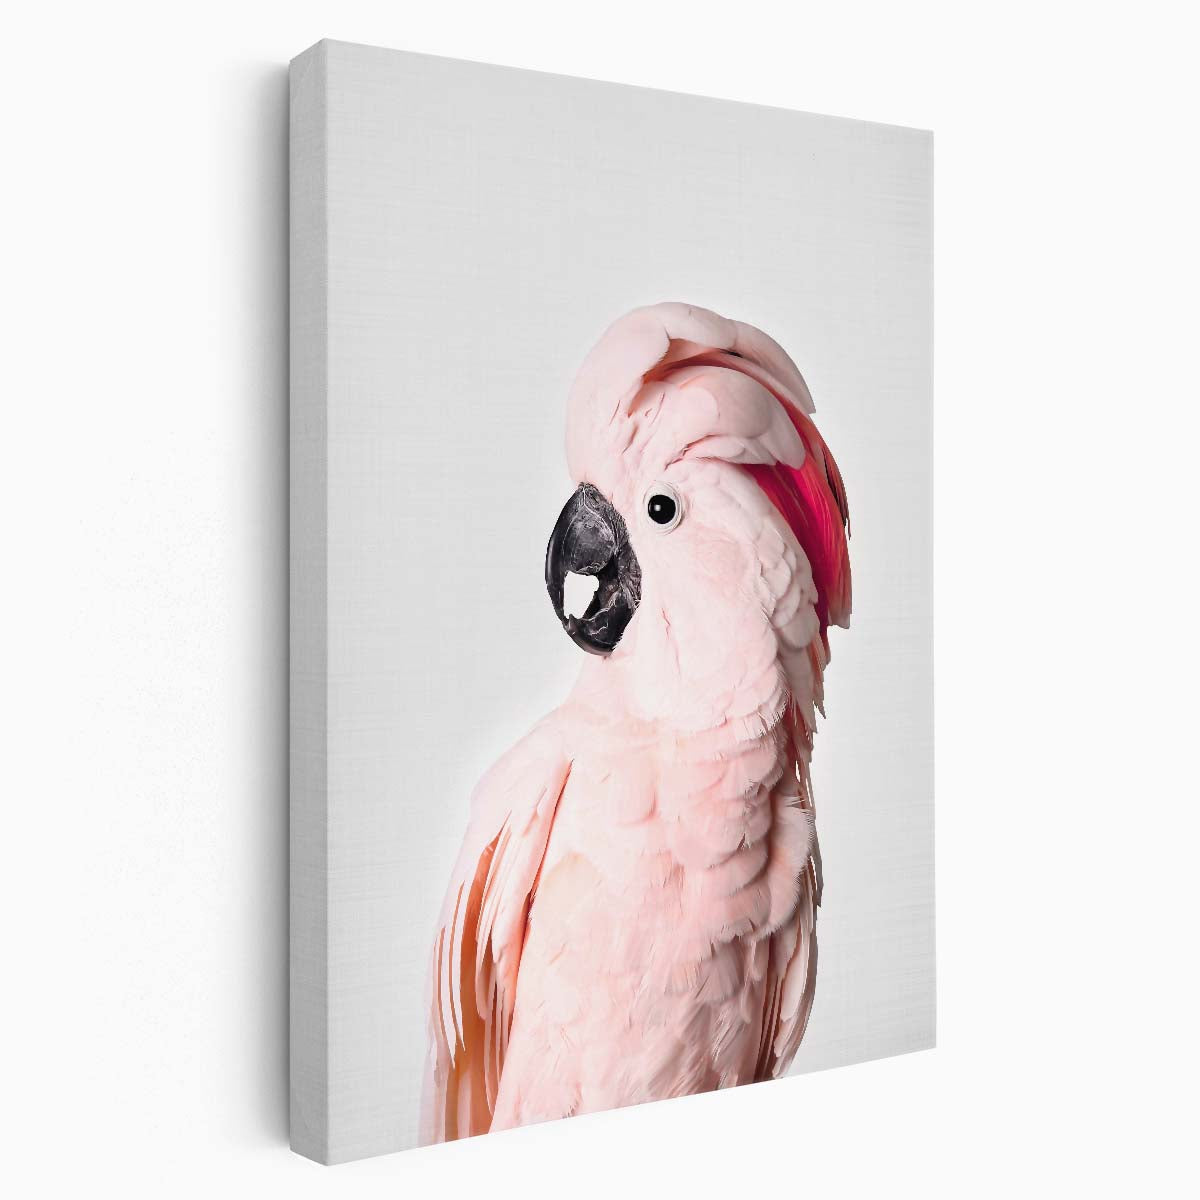 Bright Pink Cockatoo Parrot Photography Artwork on Plain Background by Luxuriance Designs, made in USA